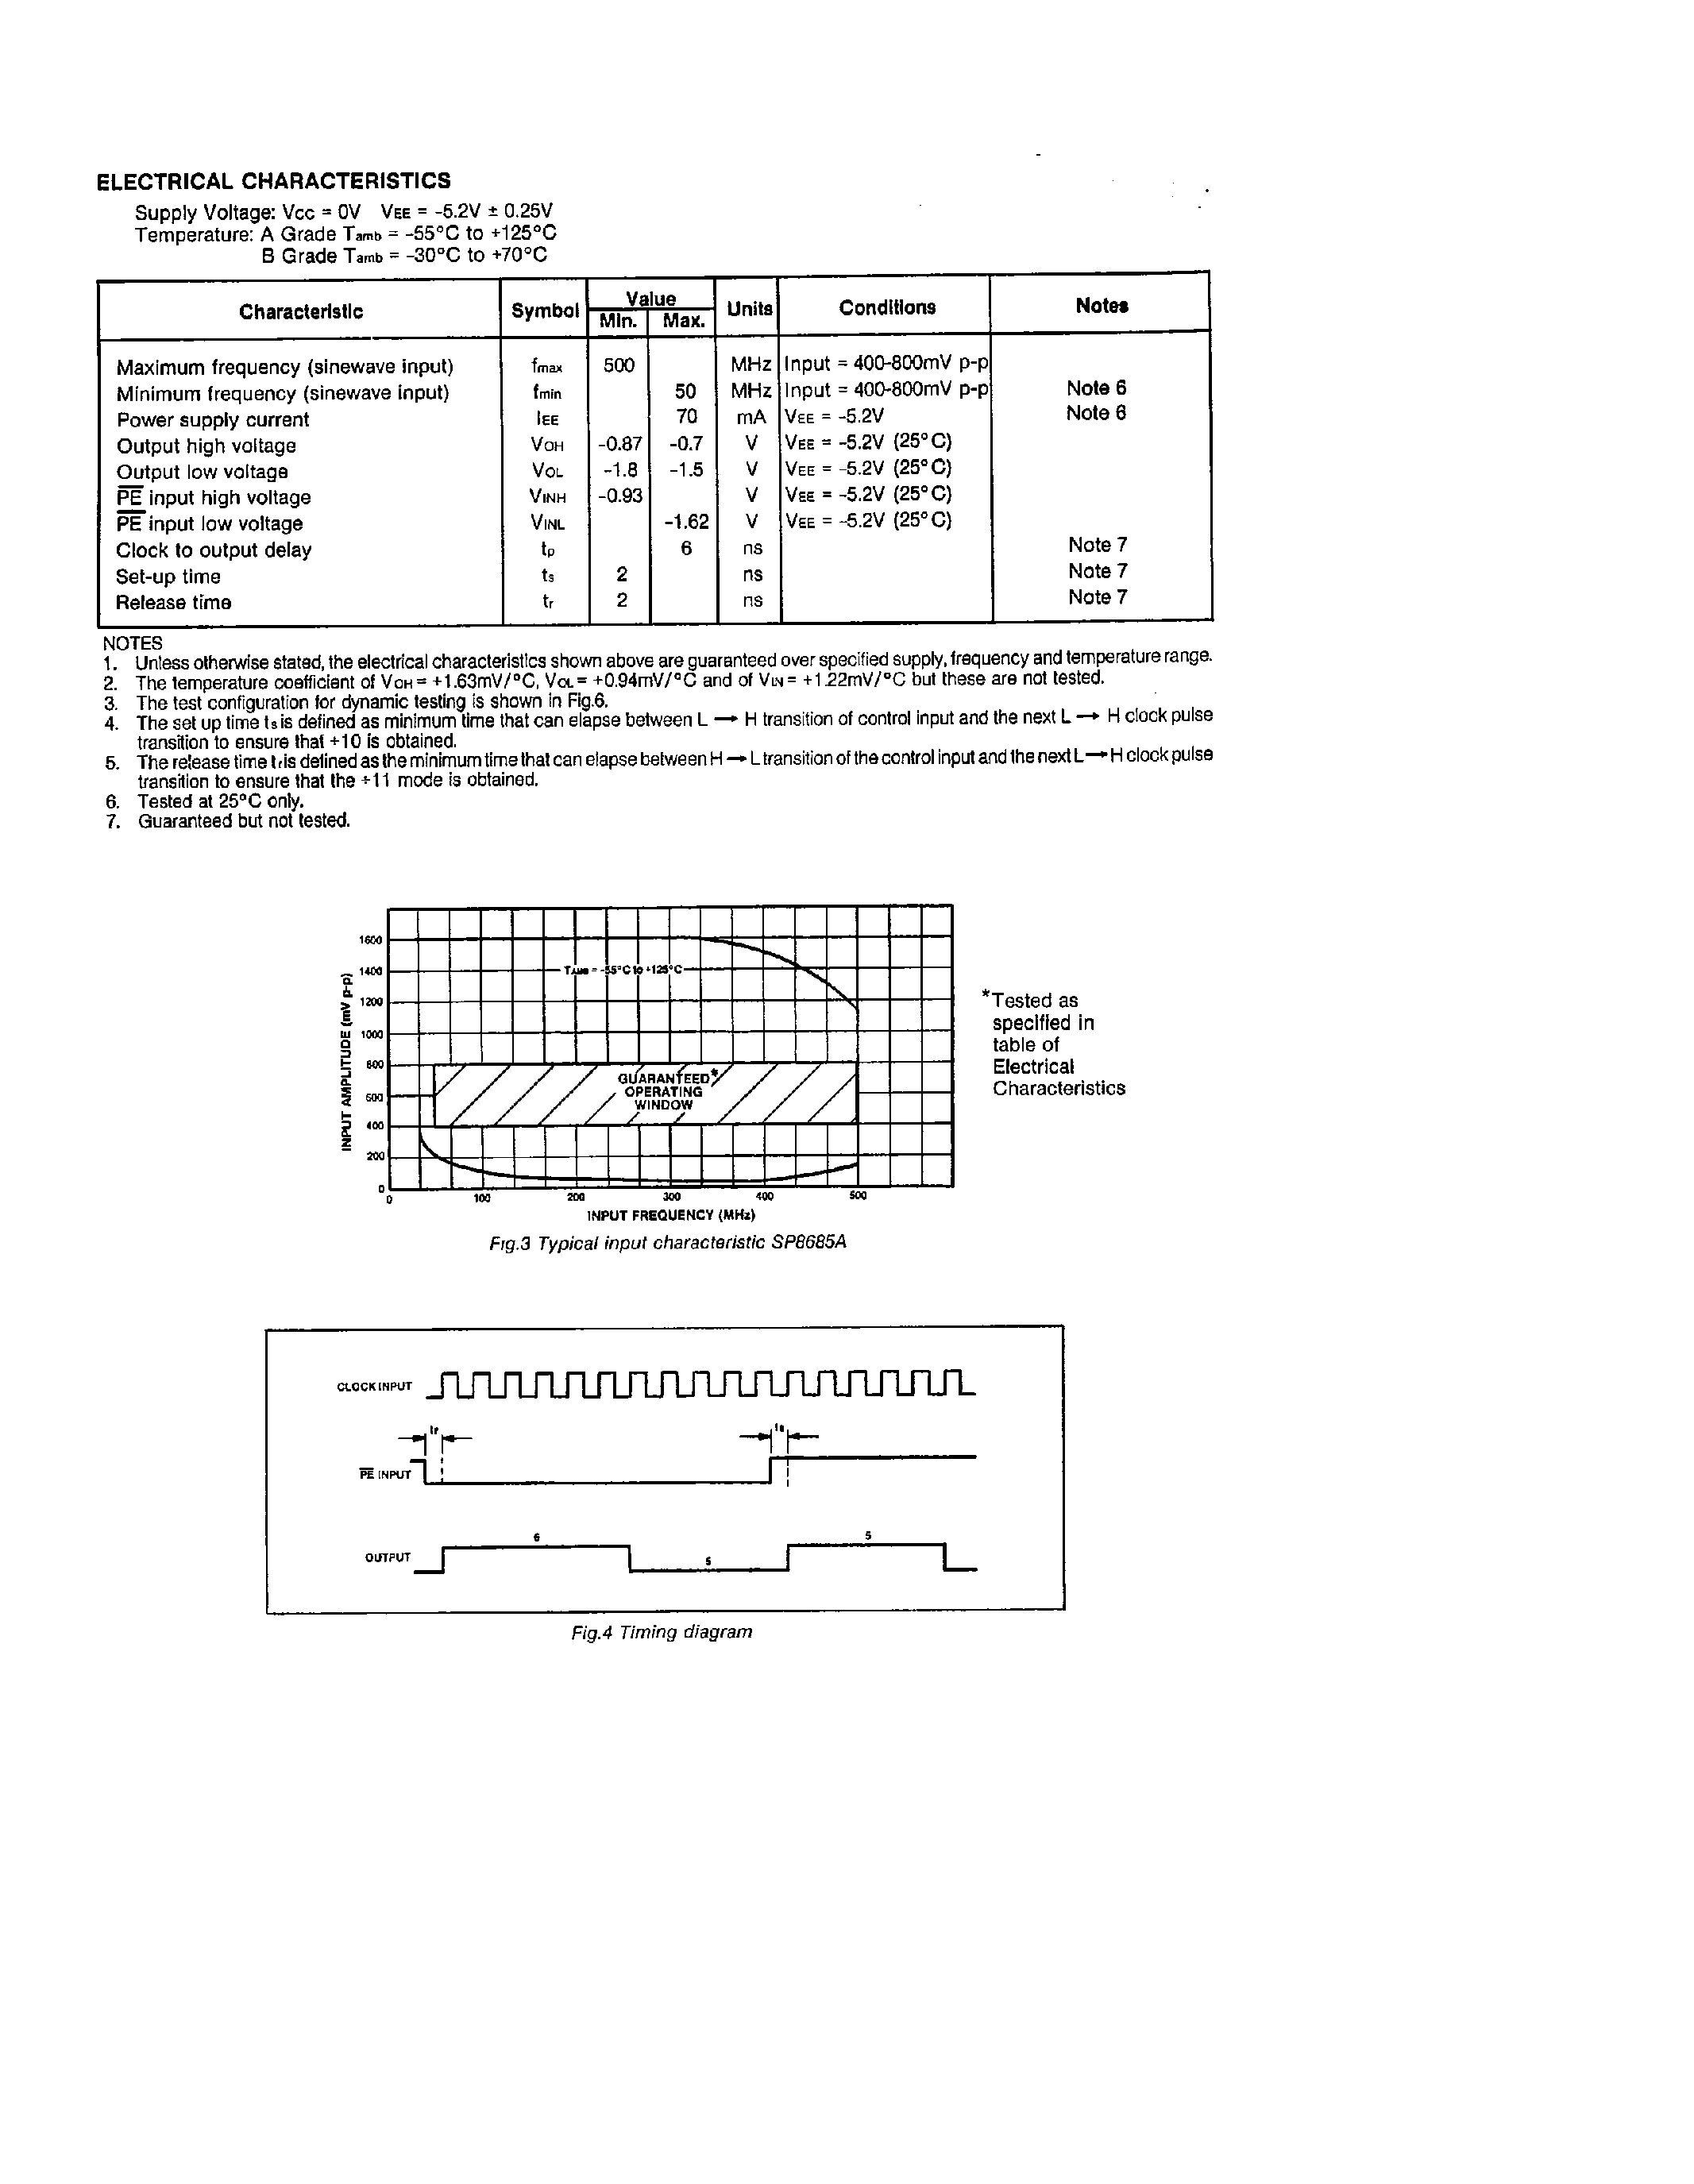 Datasheet SP8685A - (SP8685A/B) ECL Variable Modulus Divider page 2